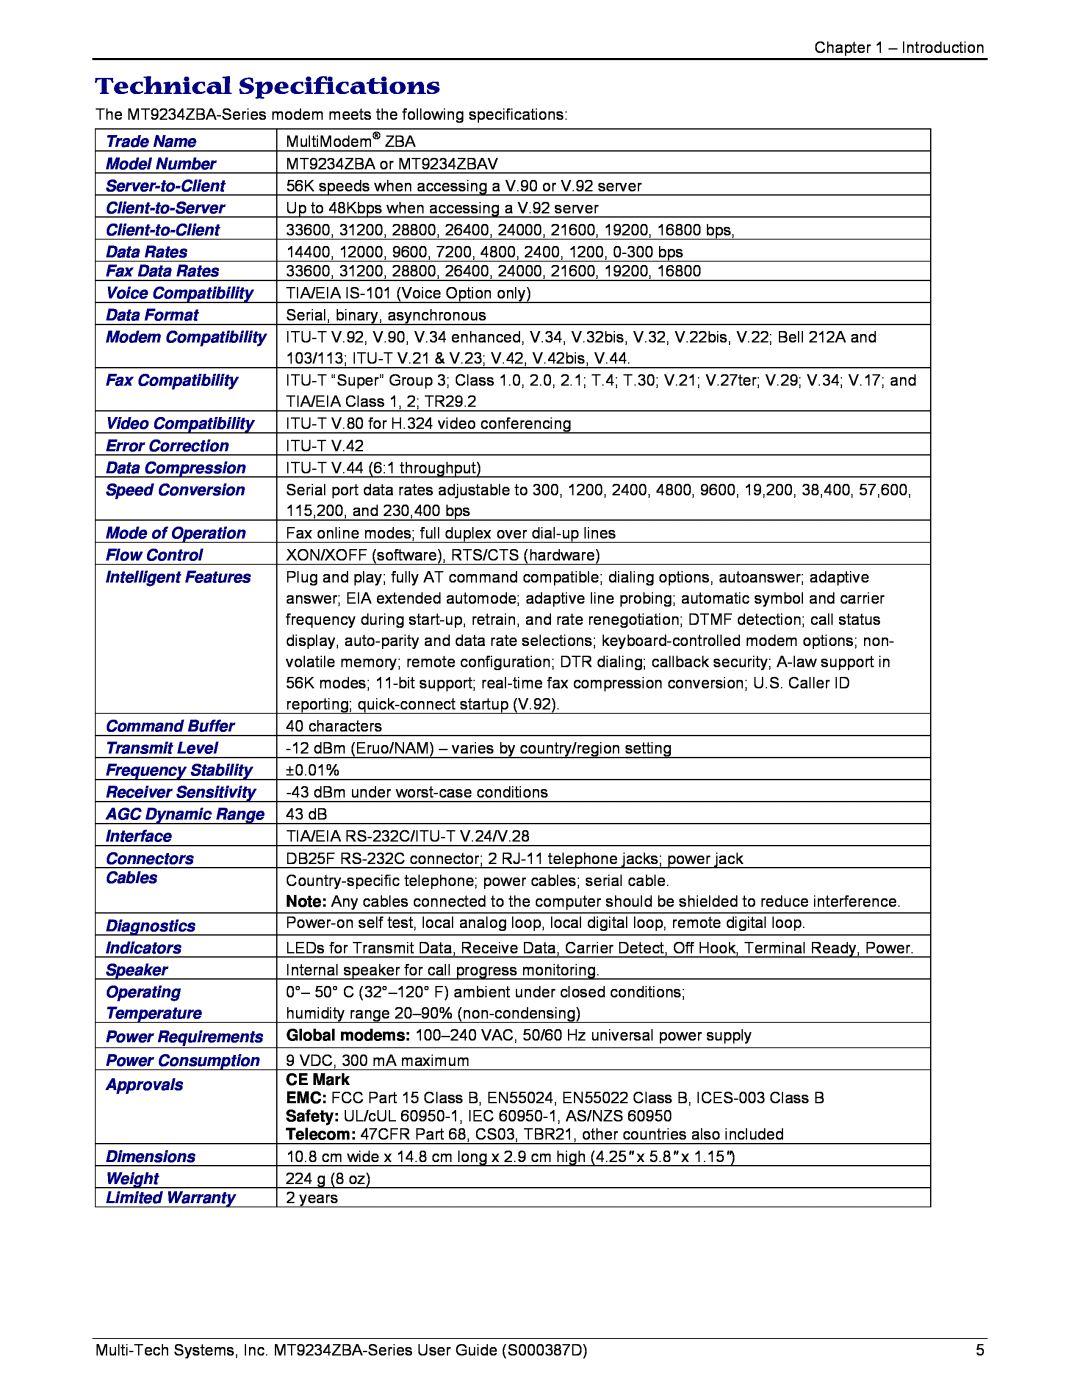 Multi-Tech Systems MT9234ZBA manual Technical Specifications 